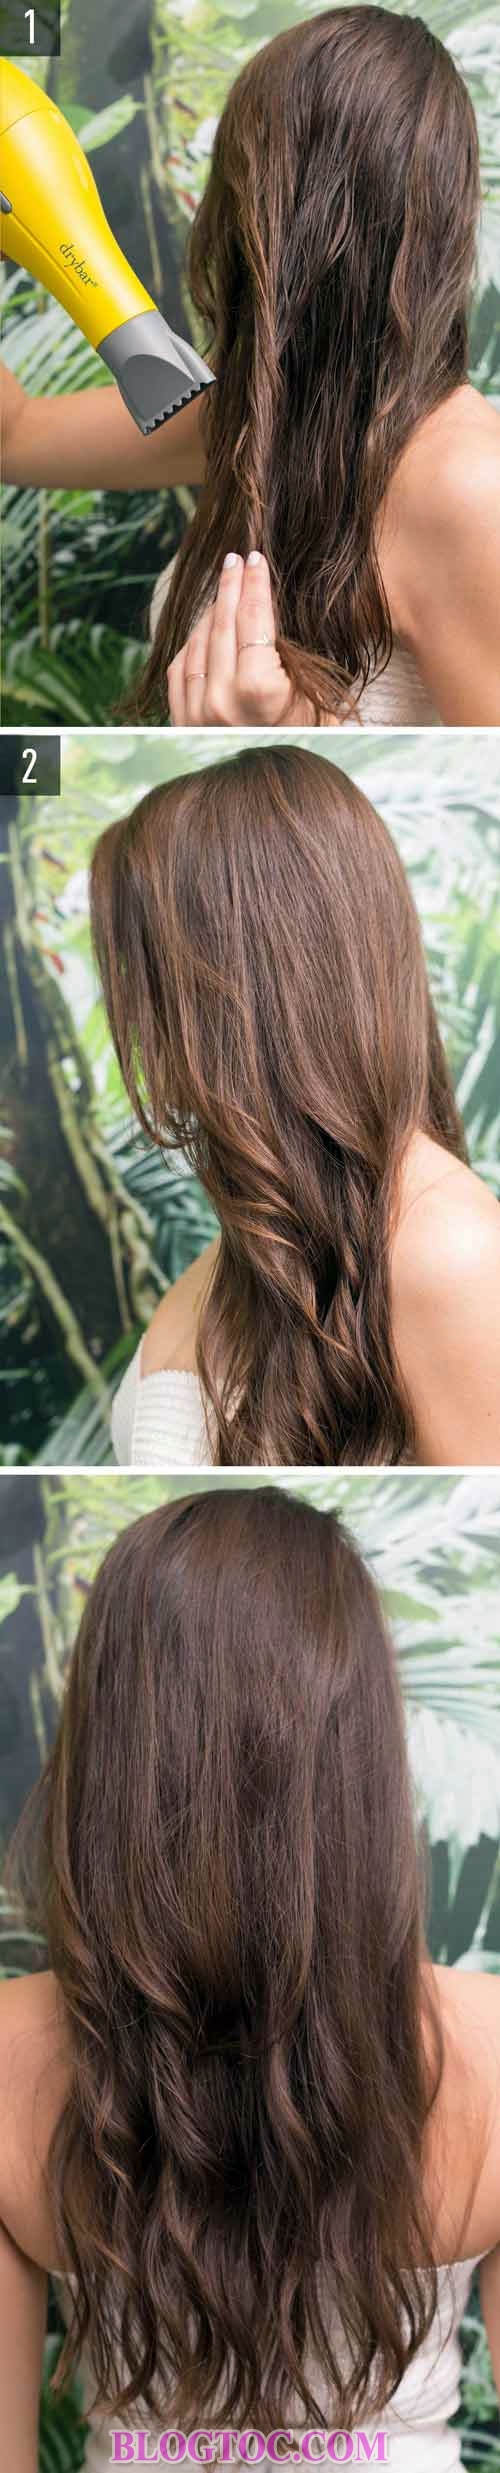 Simple beautiful hairstyles you can make at home with just a little free time 8